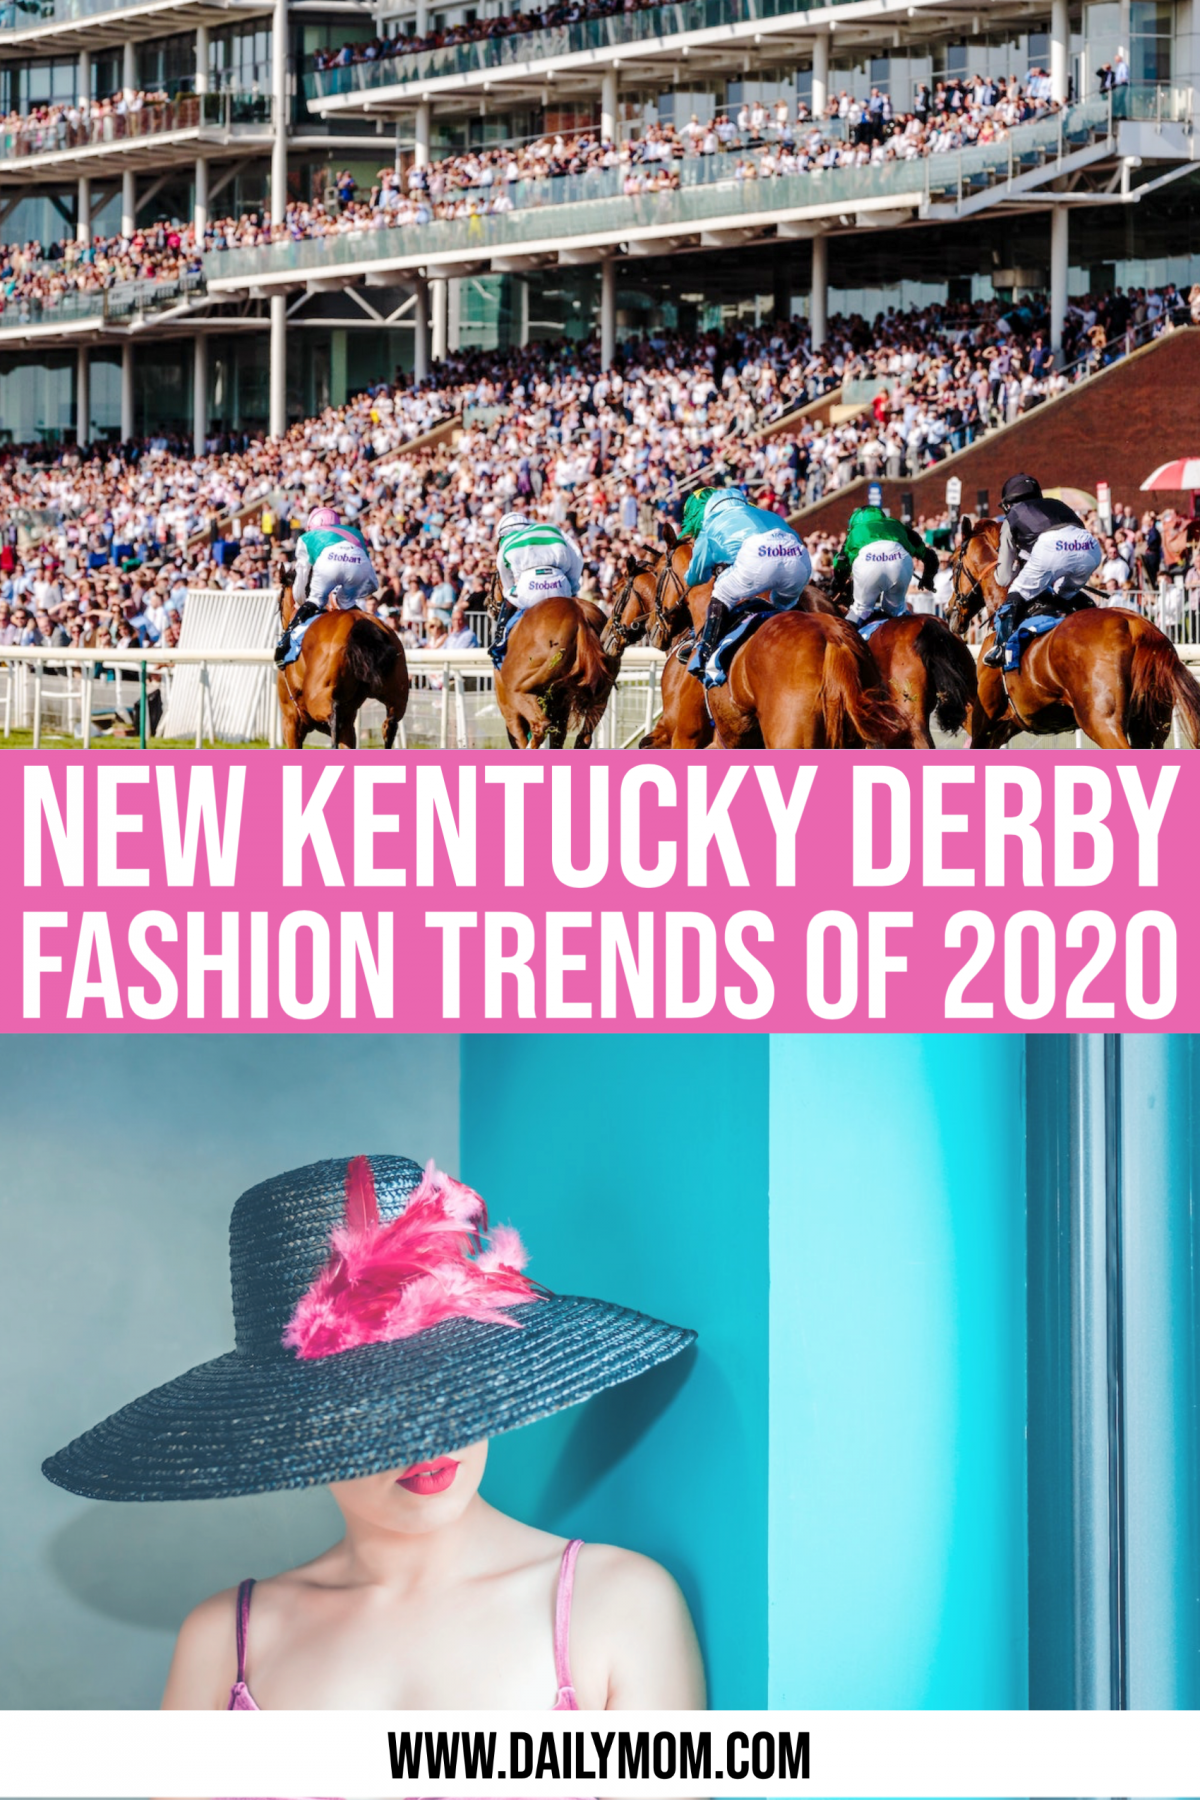 The New Kentucky Derby Fashion Trend Of 2020